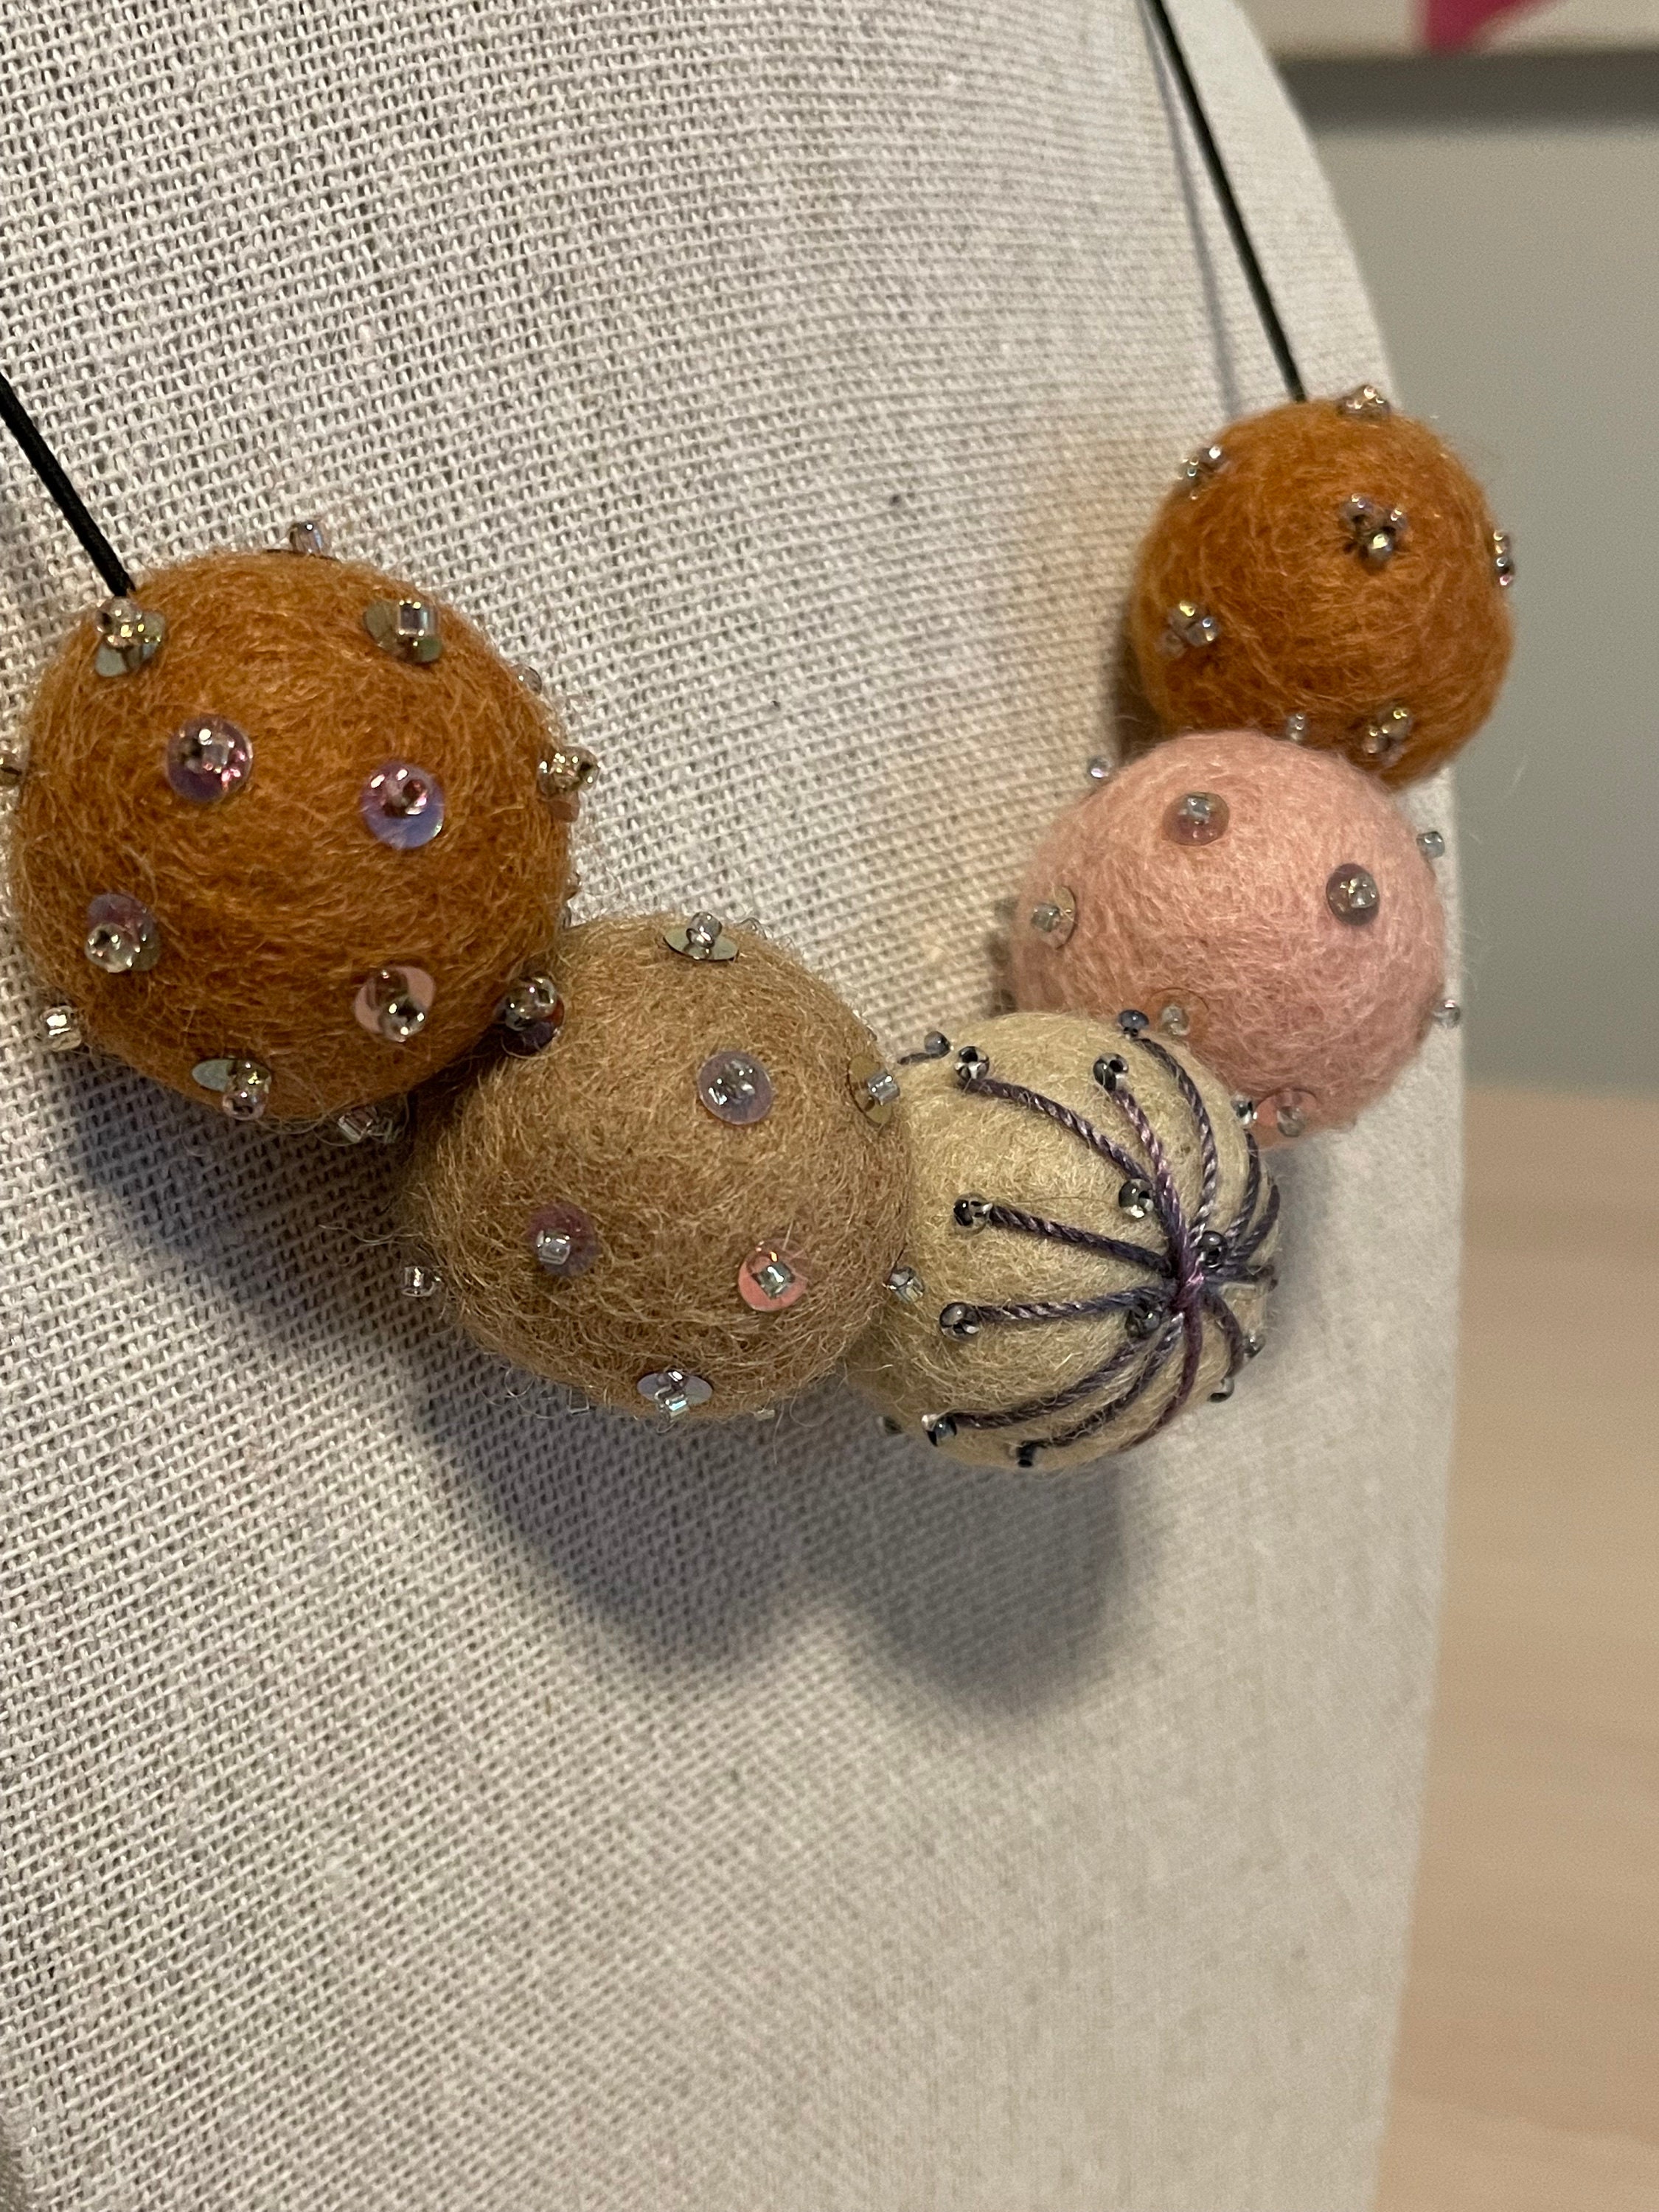 Embroidered Felt Ball Necklace by Birds on A Wire Workshop